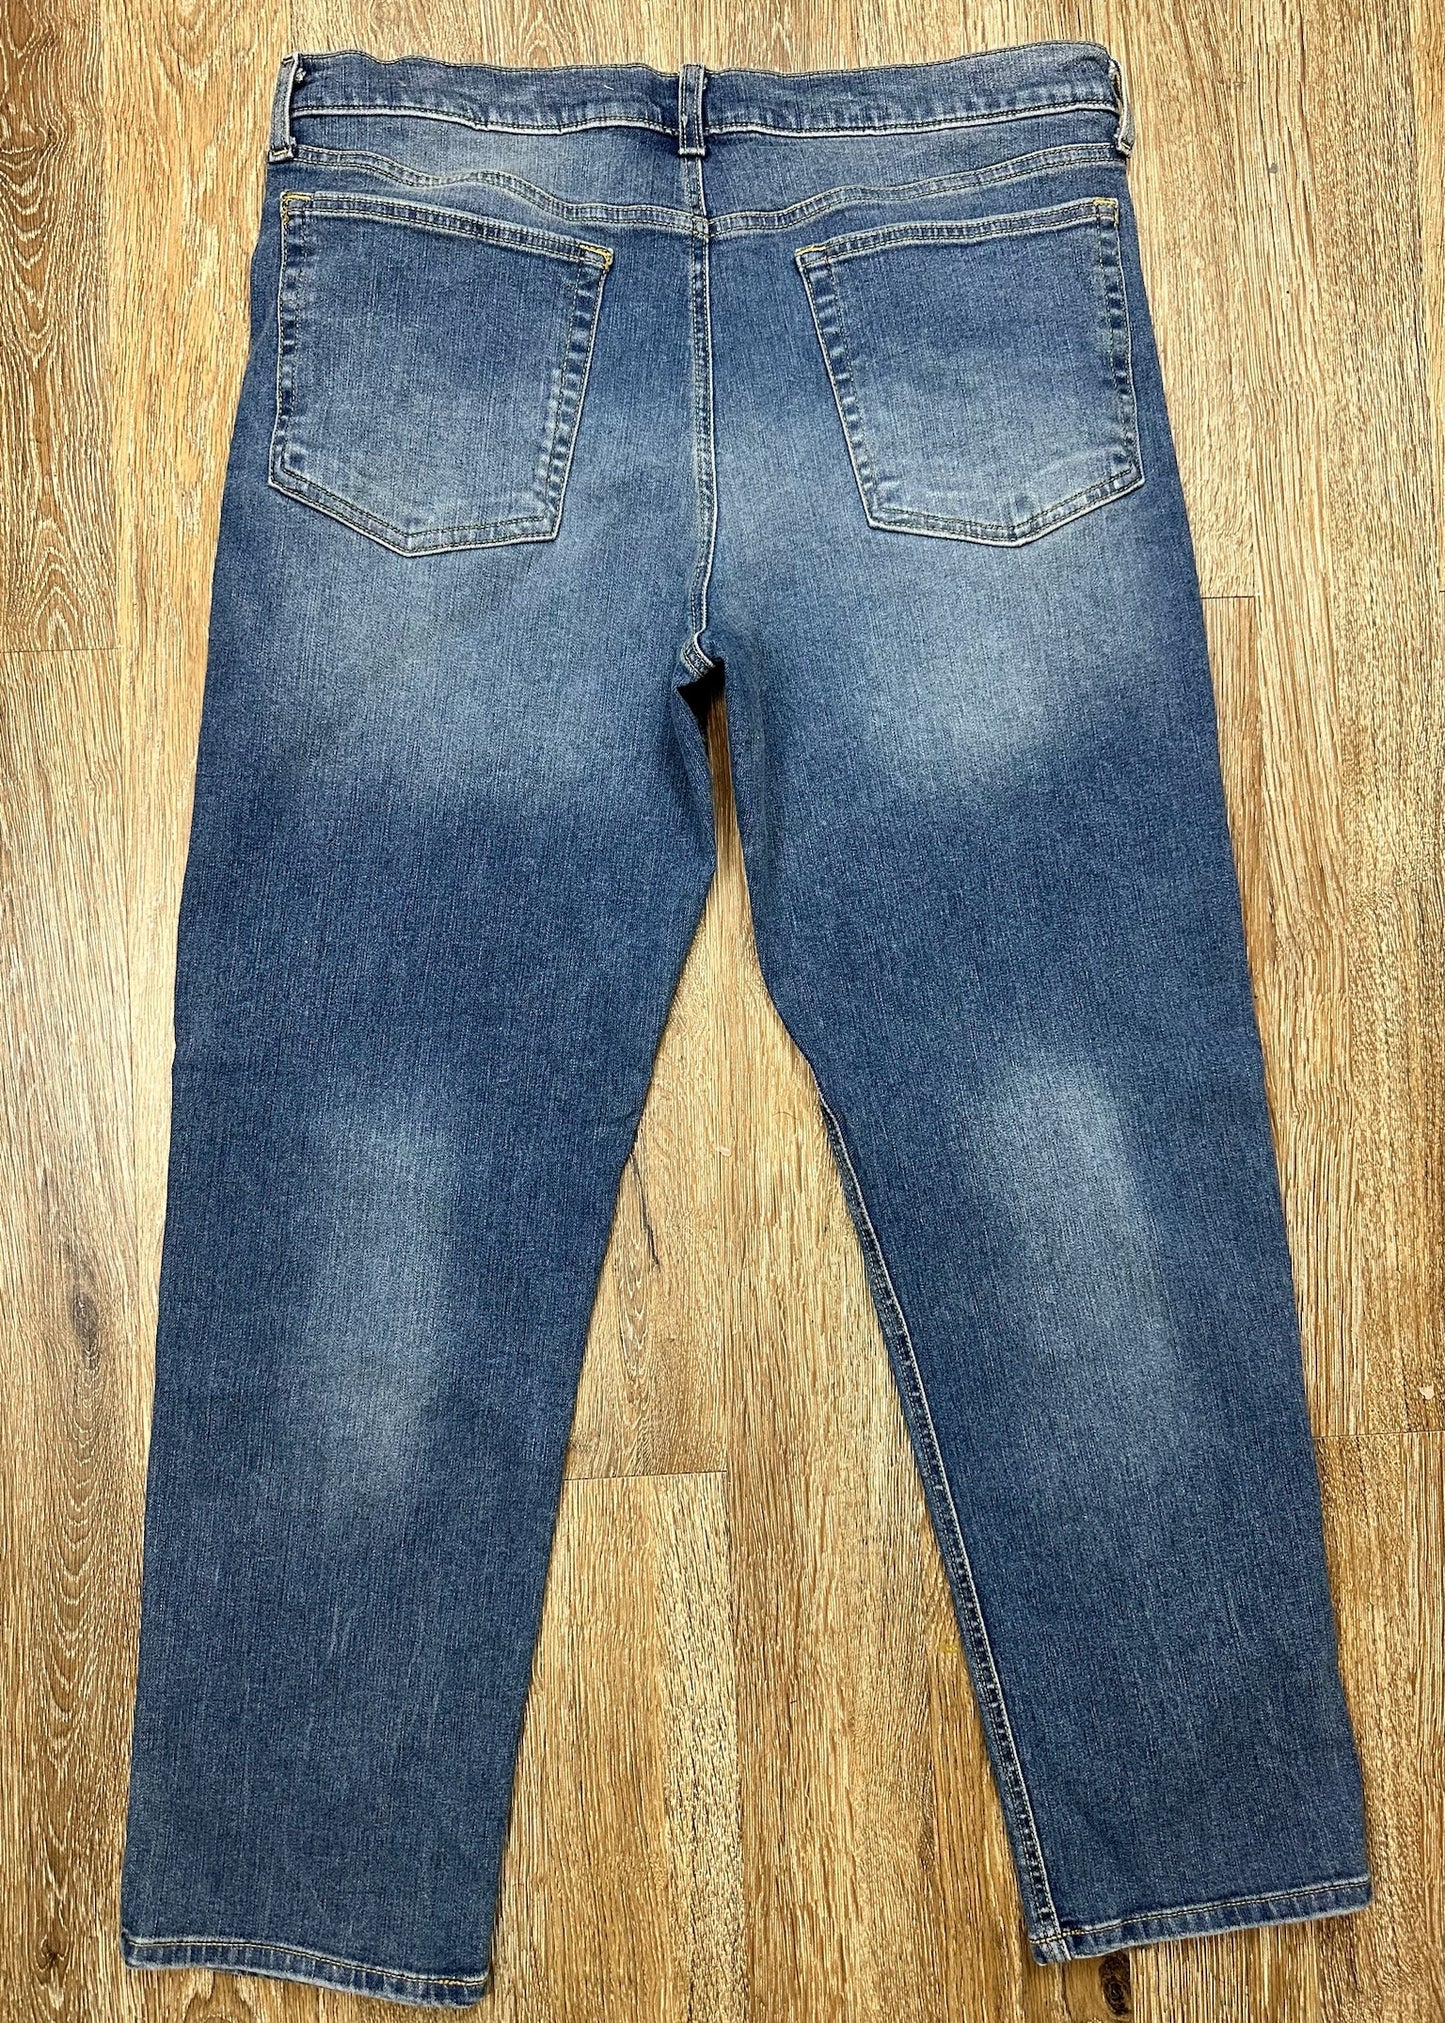 Distressed Blue Jeans by No Boundaries